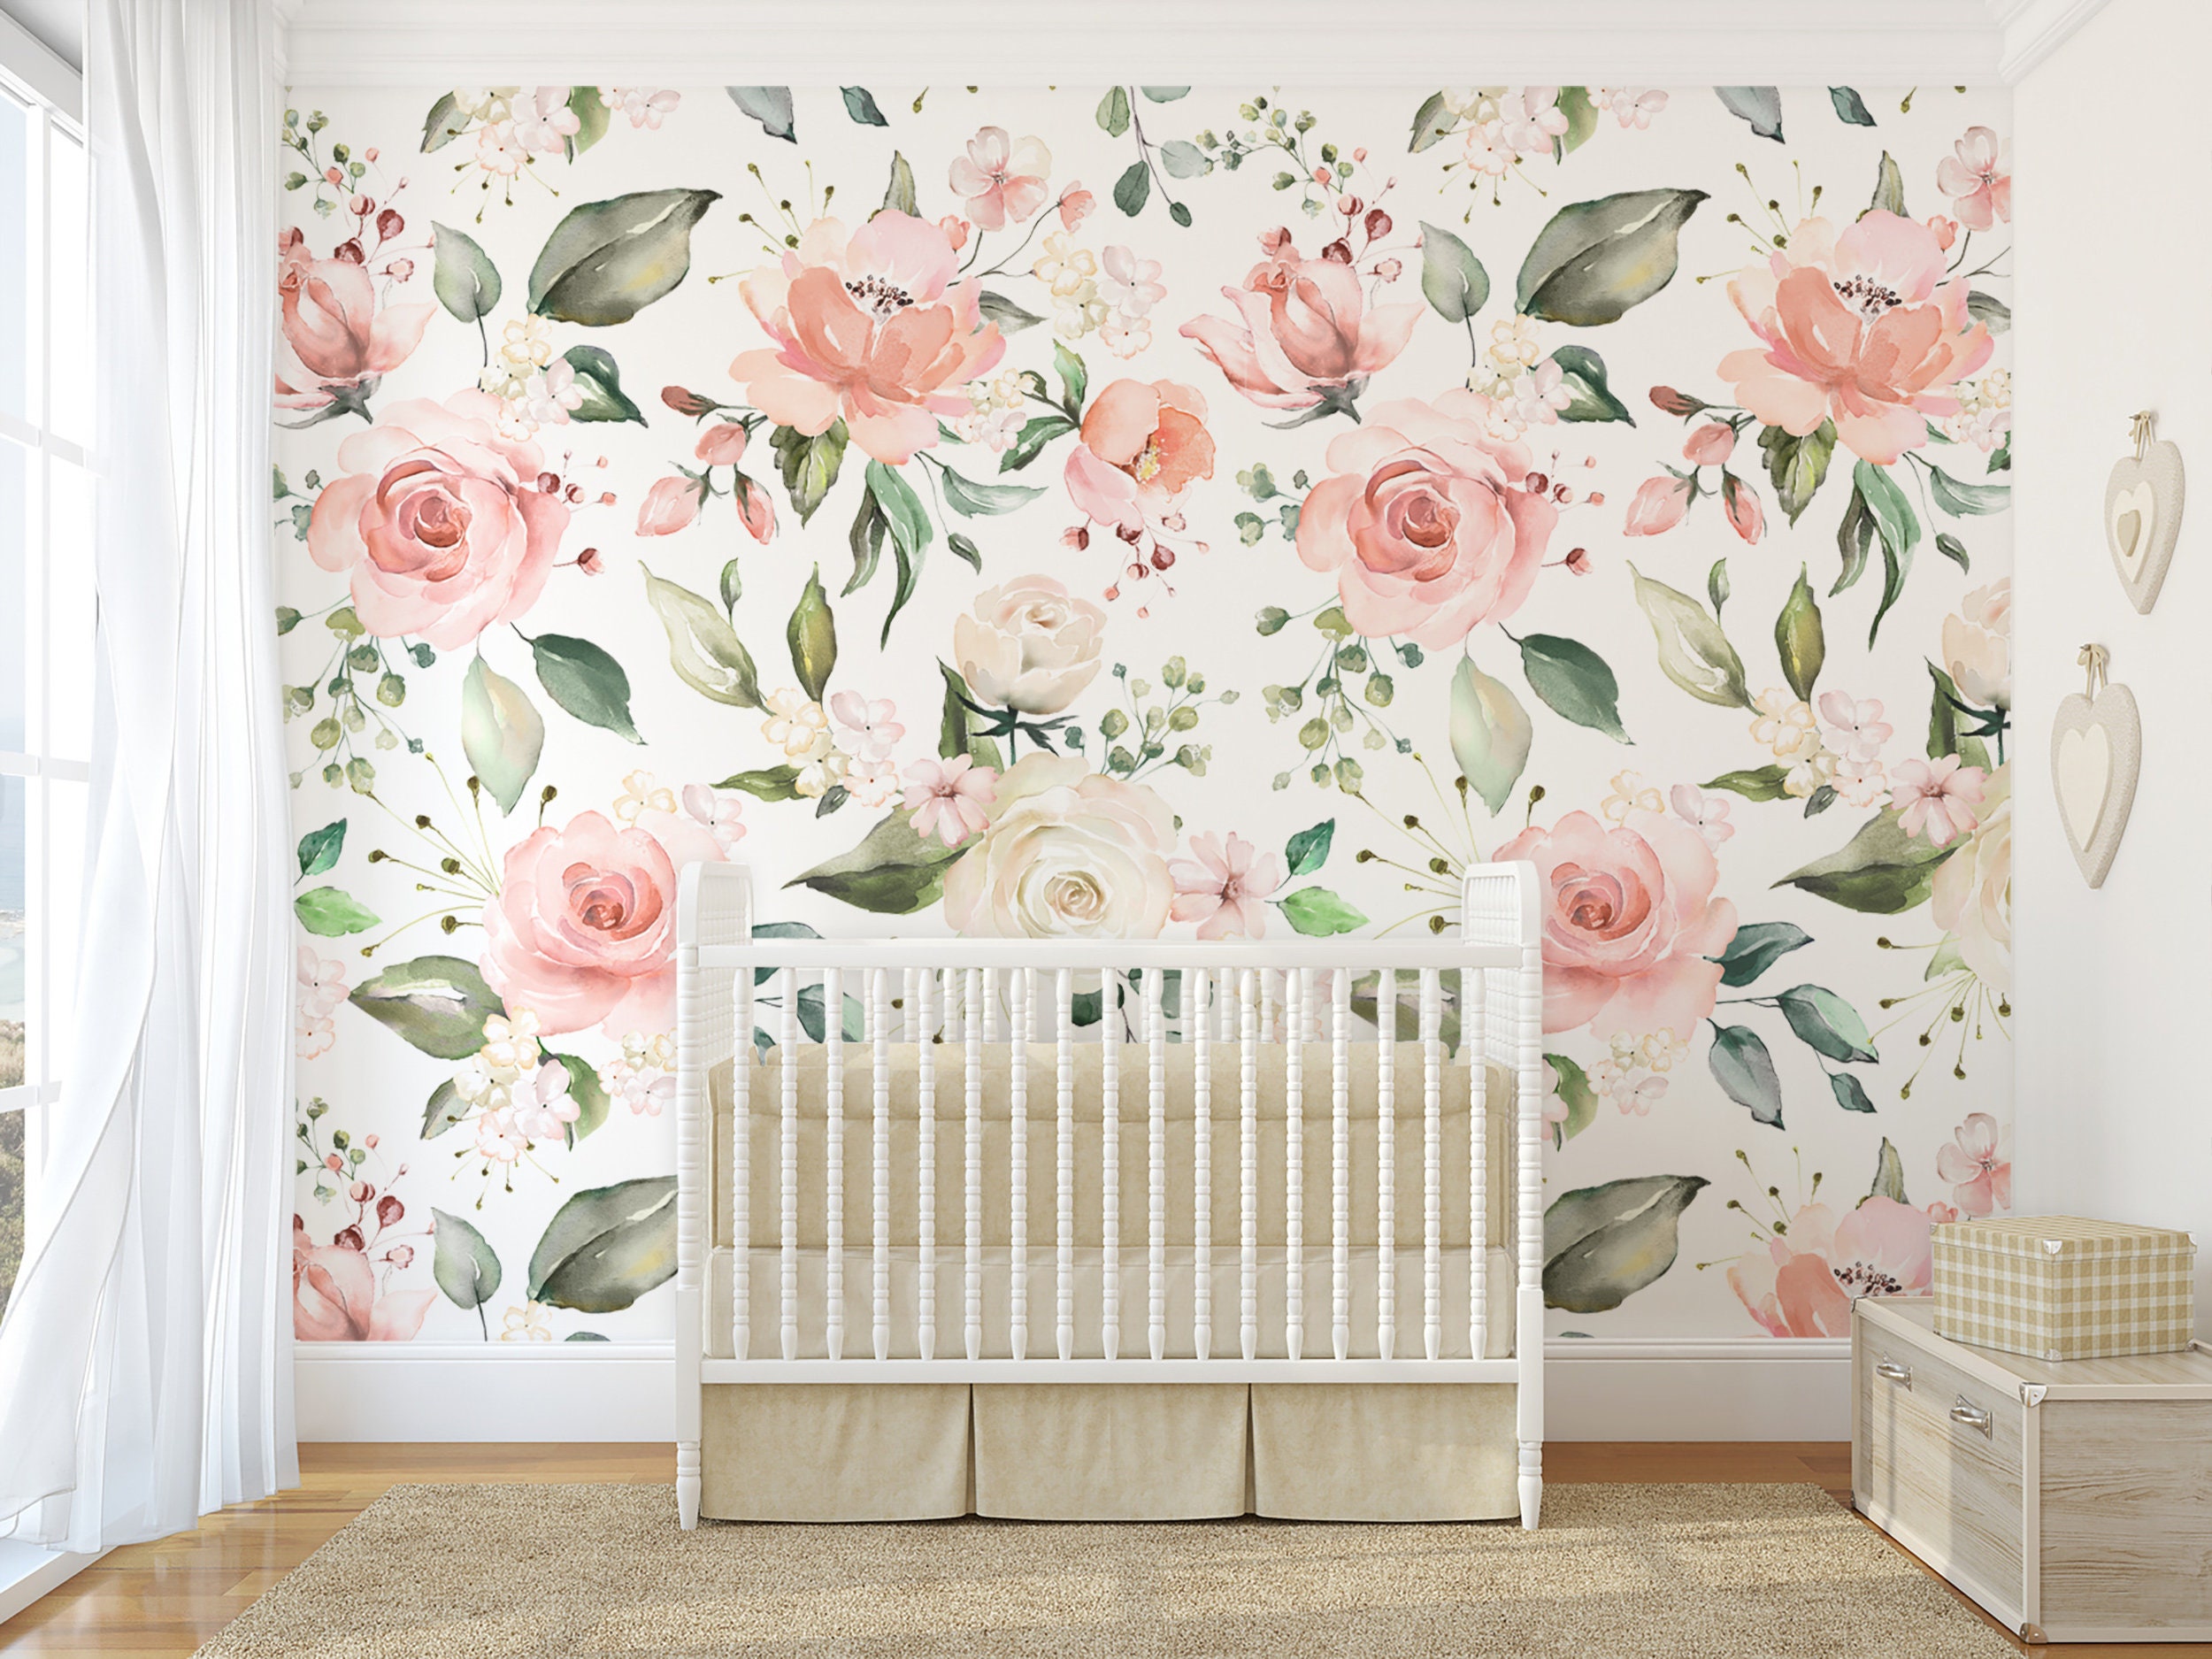 SAMPLES Olivia Rose Collection Watercolor Wall Decal & Wallpaper Nursery Décor Girl Nursery Wall Mural